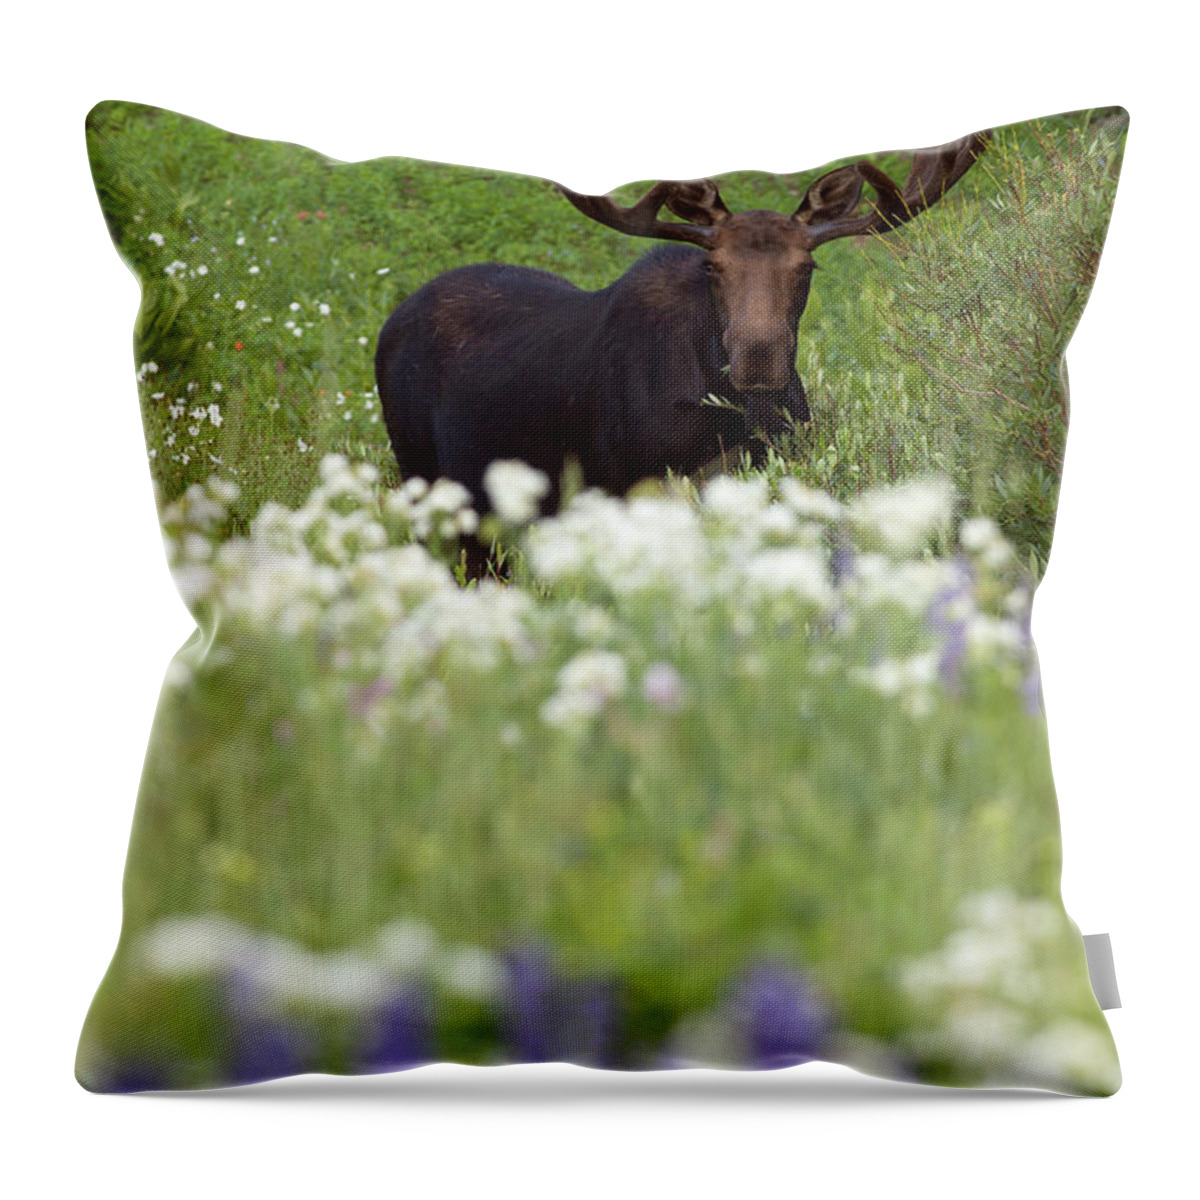 One Animal Throw Pillow featuring the photograph Bull Moose In Flowers by Ltphoto